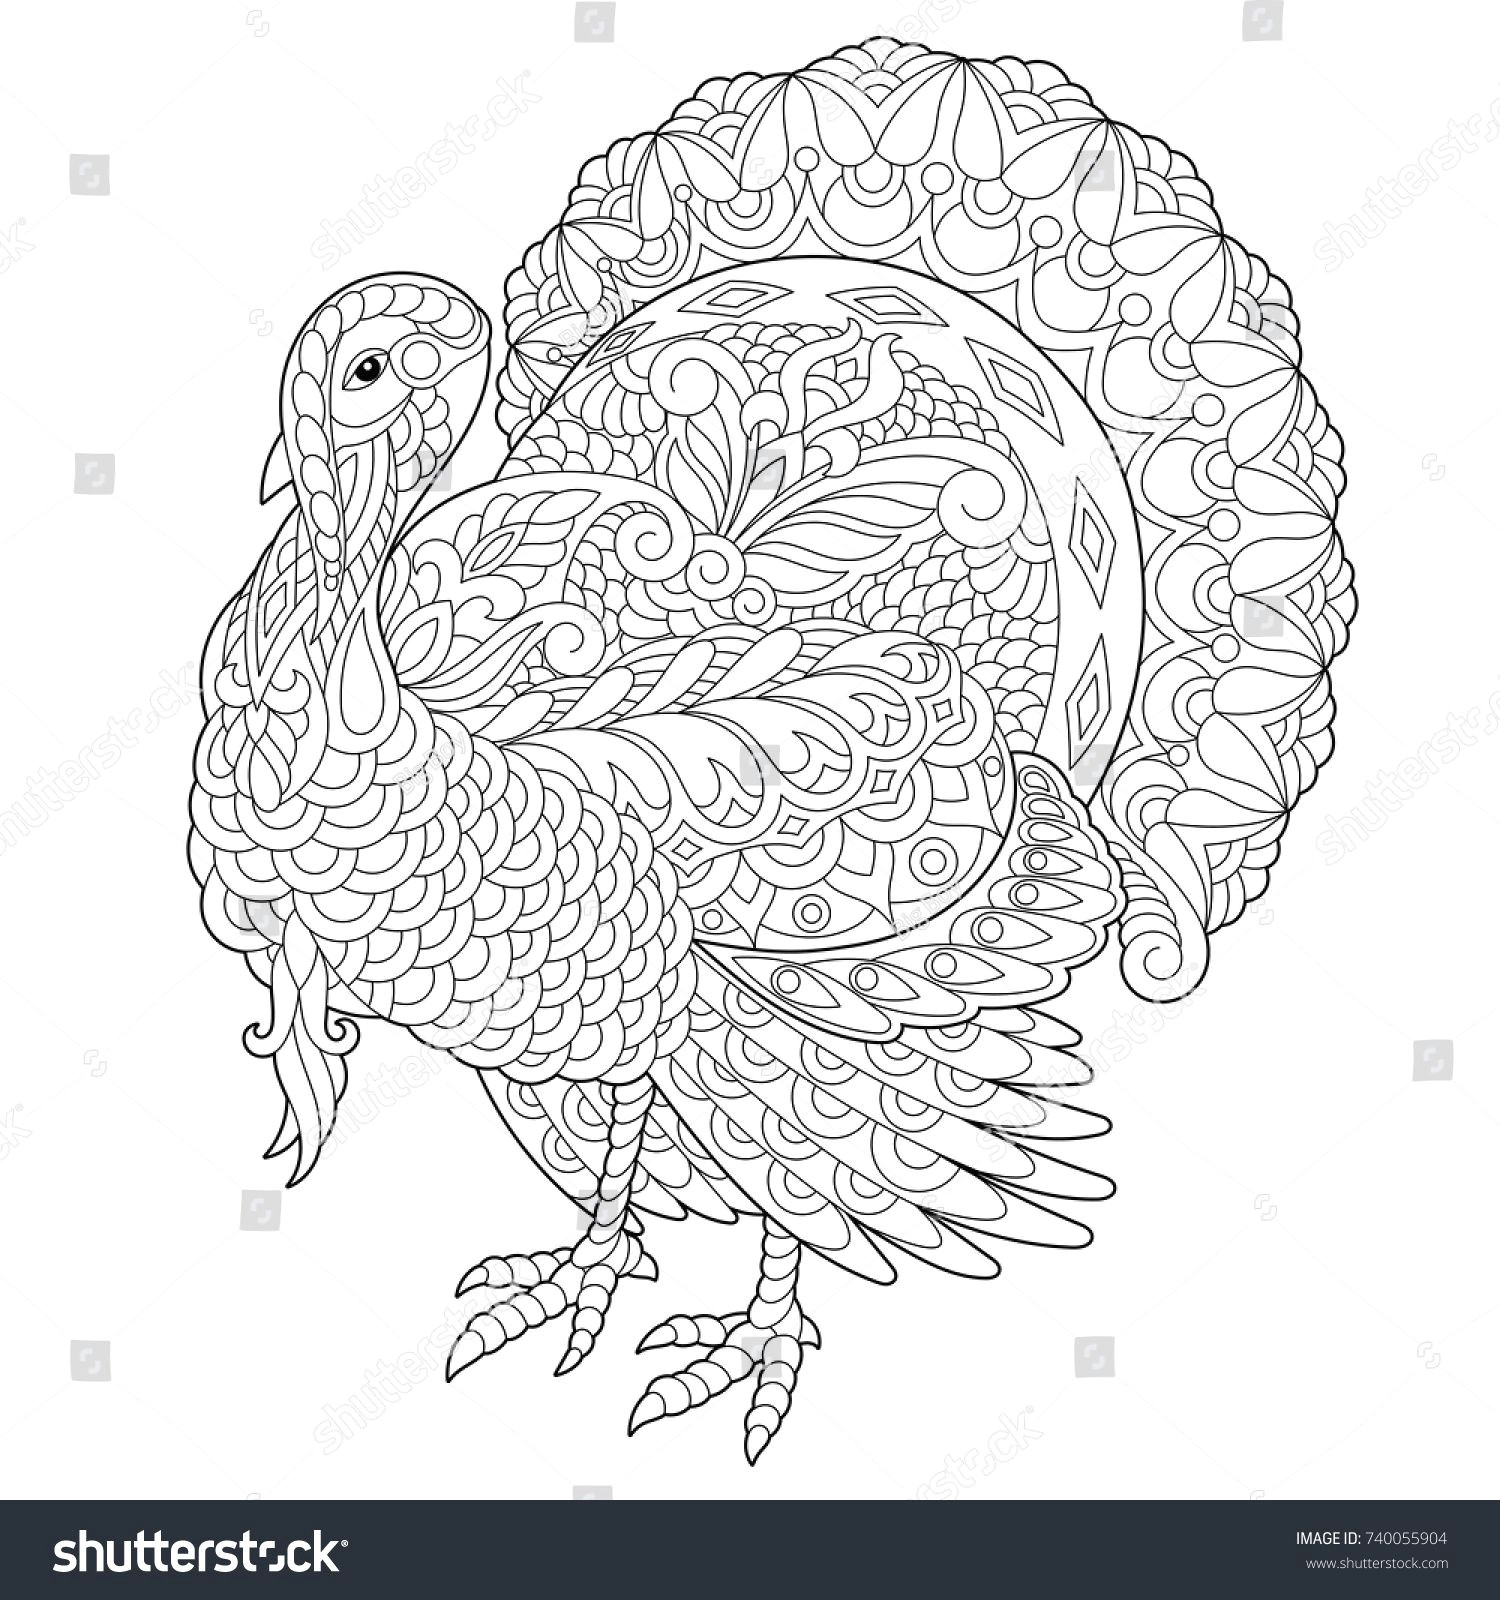 Drawing Of A Turkey Coloring Page Of Turkey for Thanksgiving Day Greeting Card Freehand